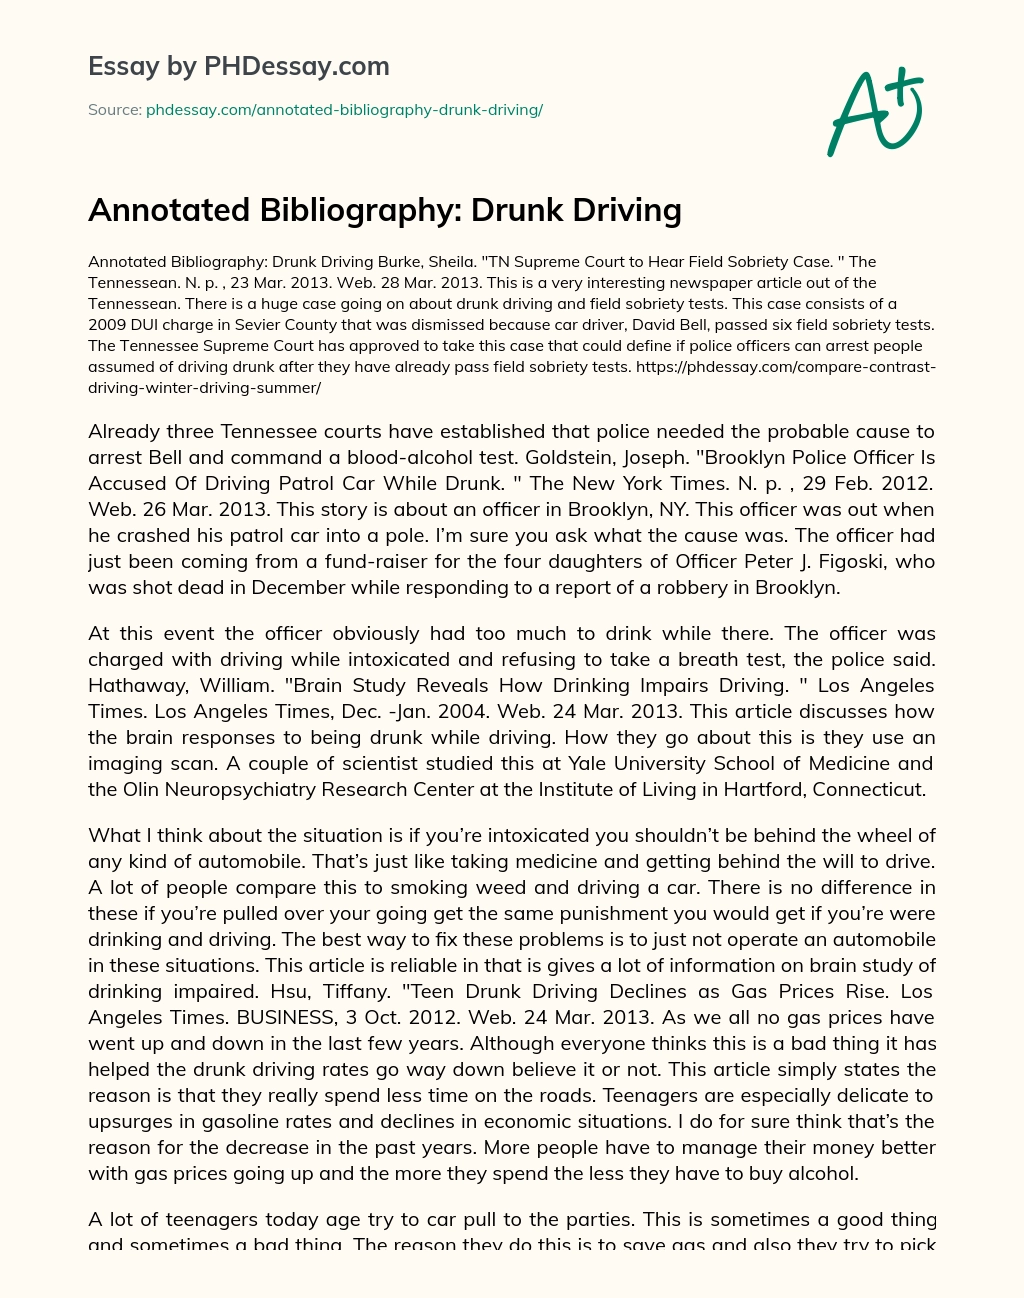 Annotated Bibliography: Drunk Driving essay